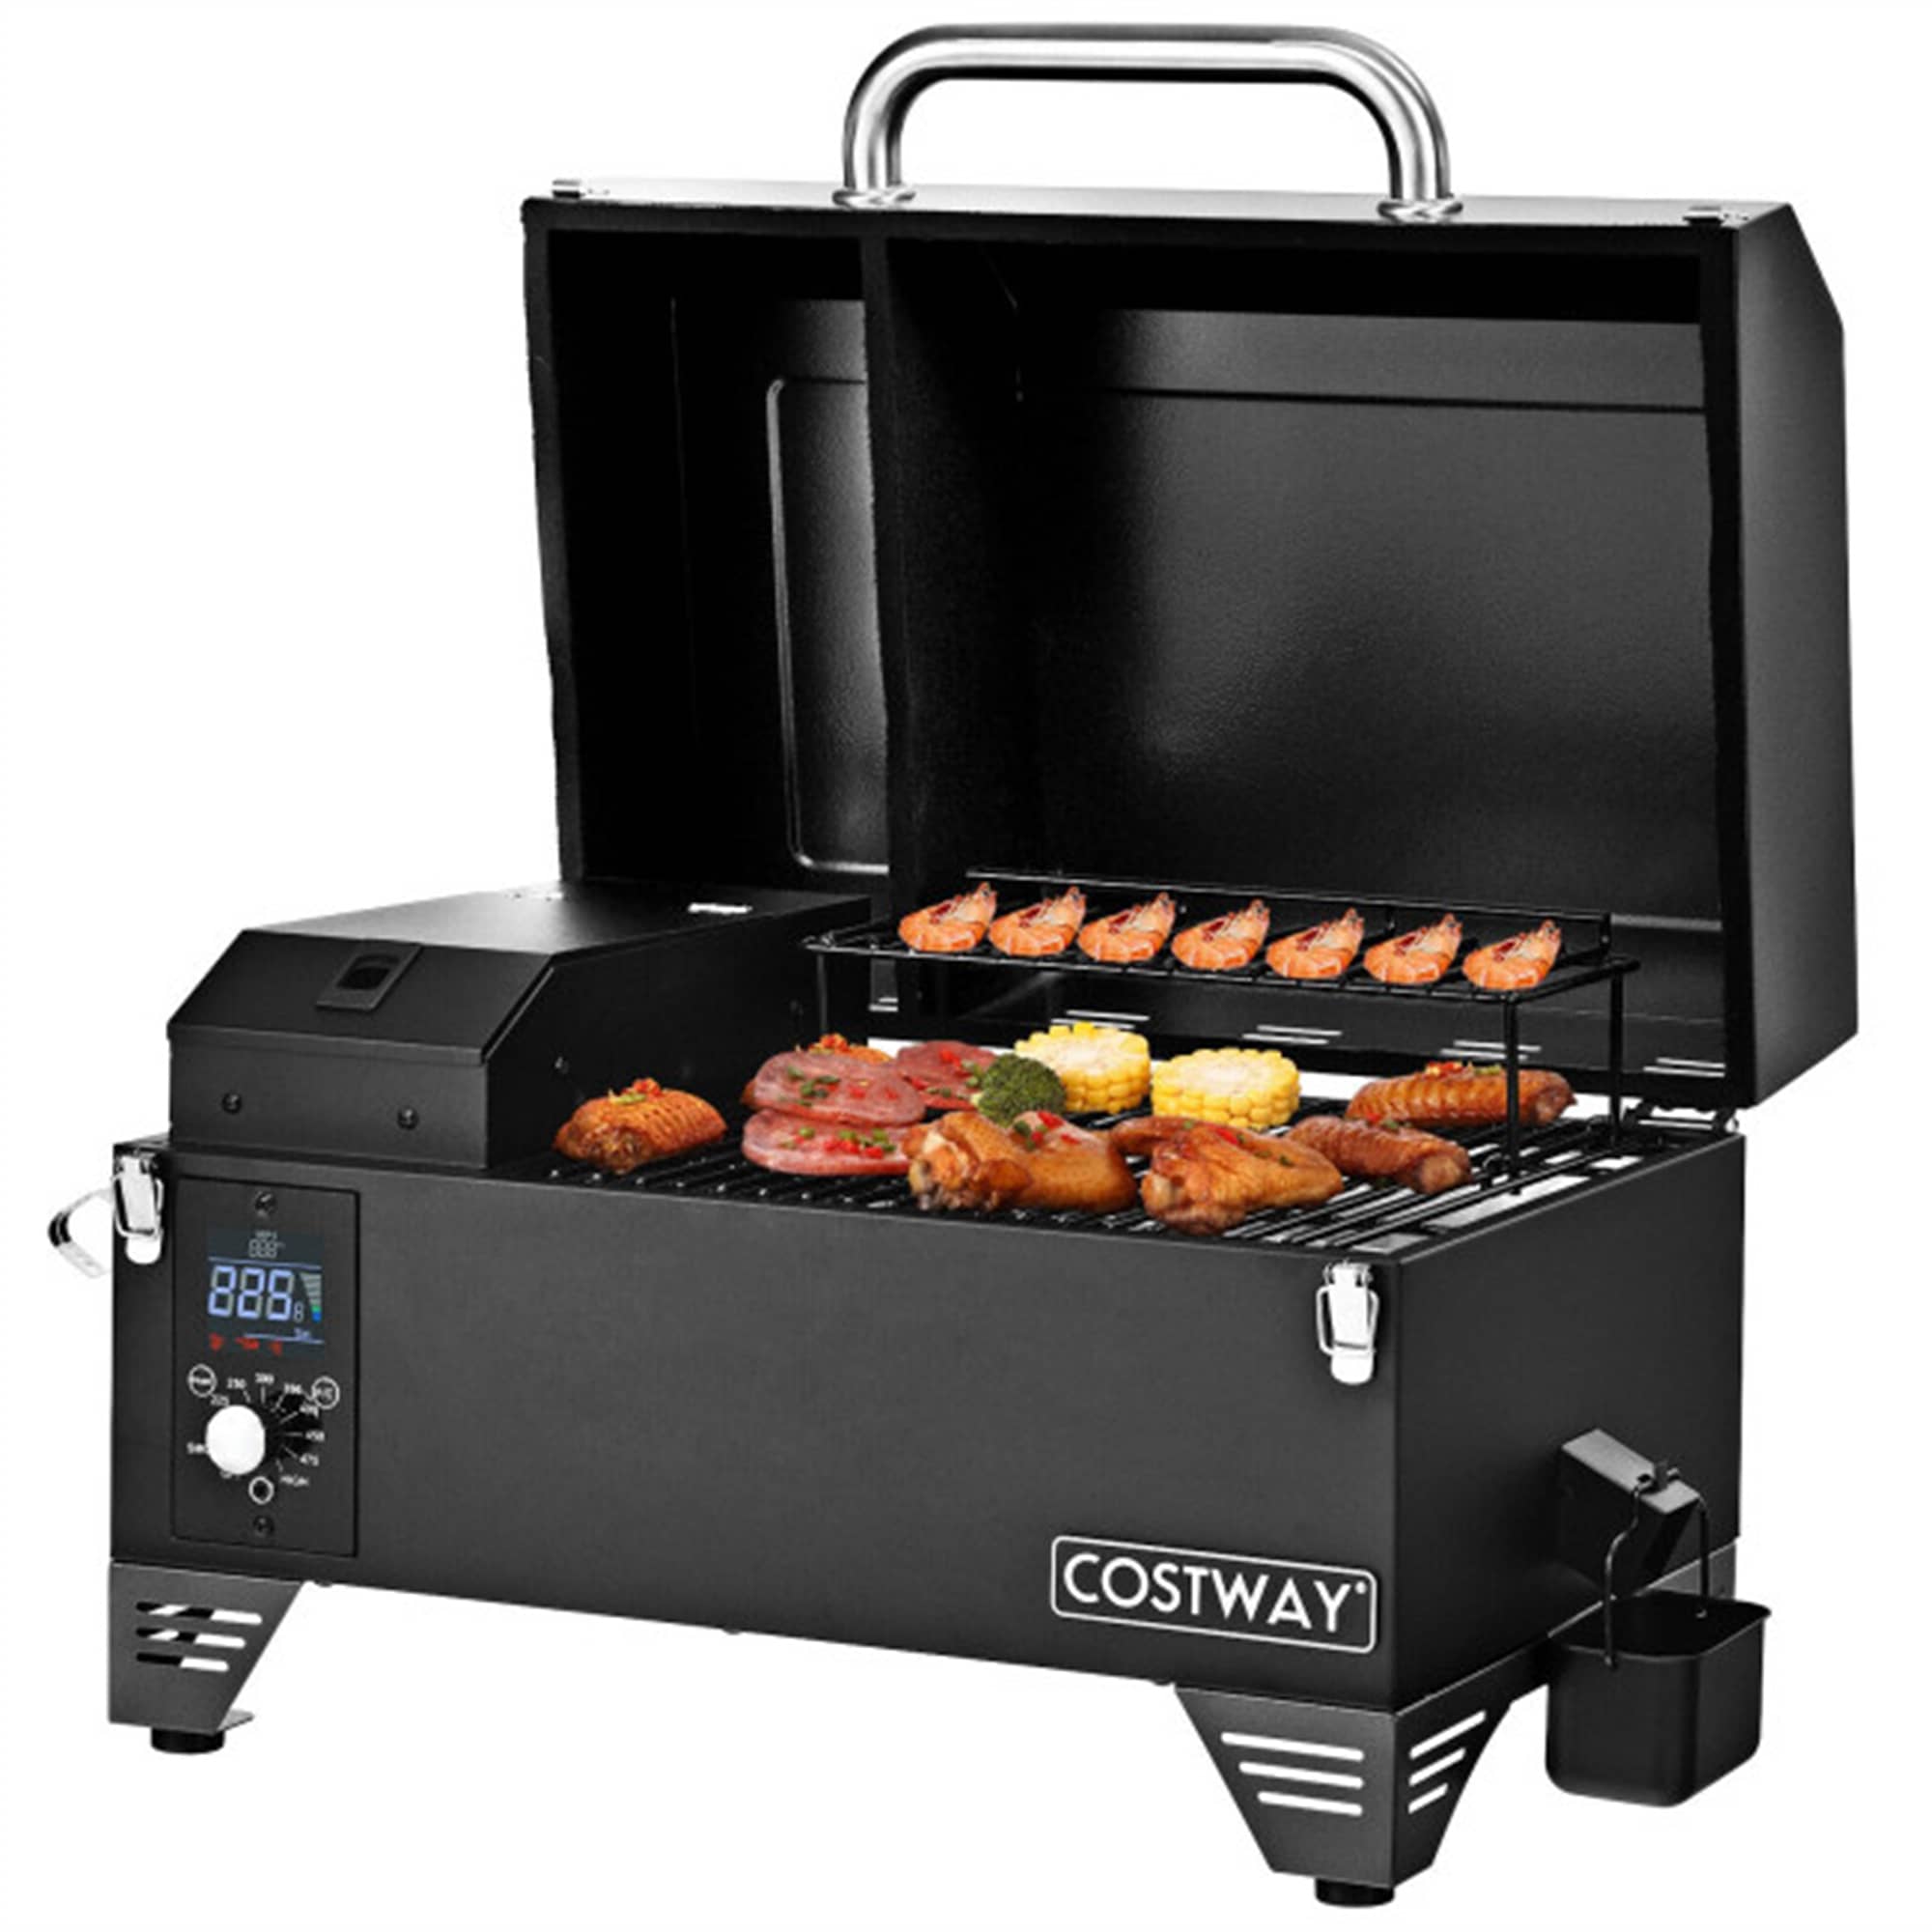 CASAINC Outdoor Portable Tabletop Pellet Grill and Smoker with Digital Control System for BBQ